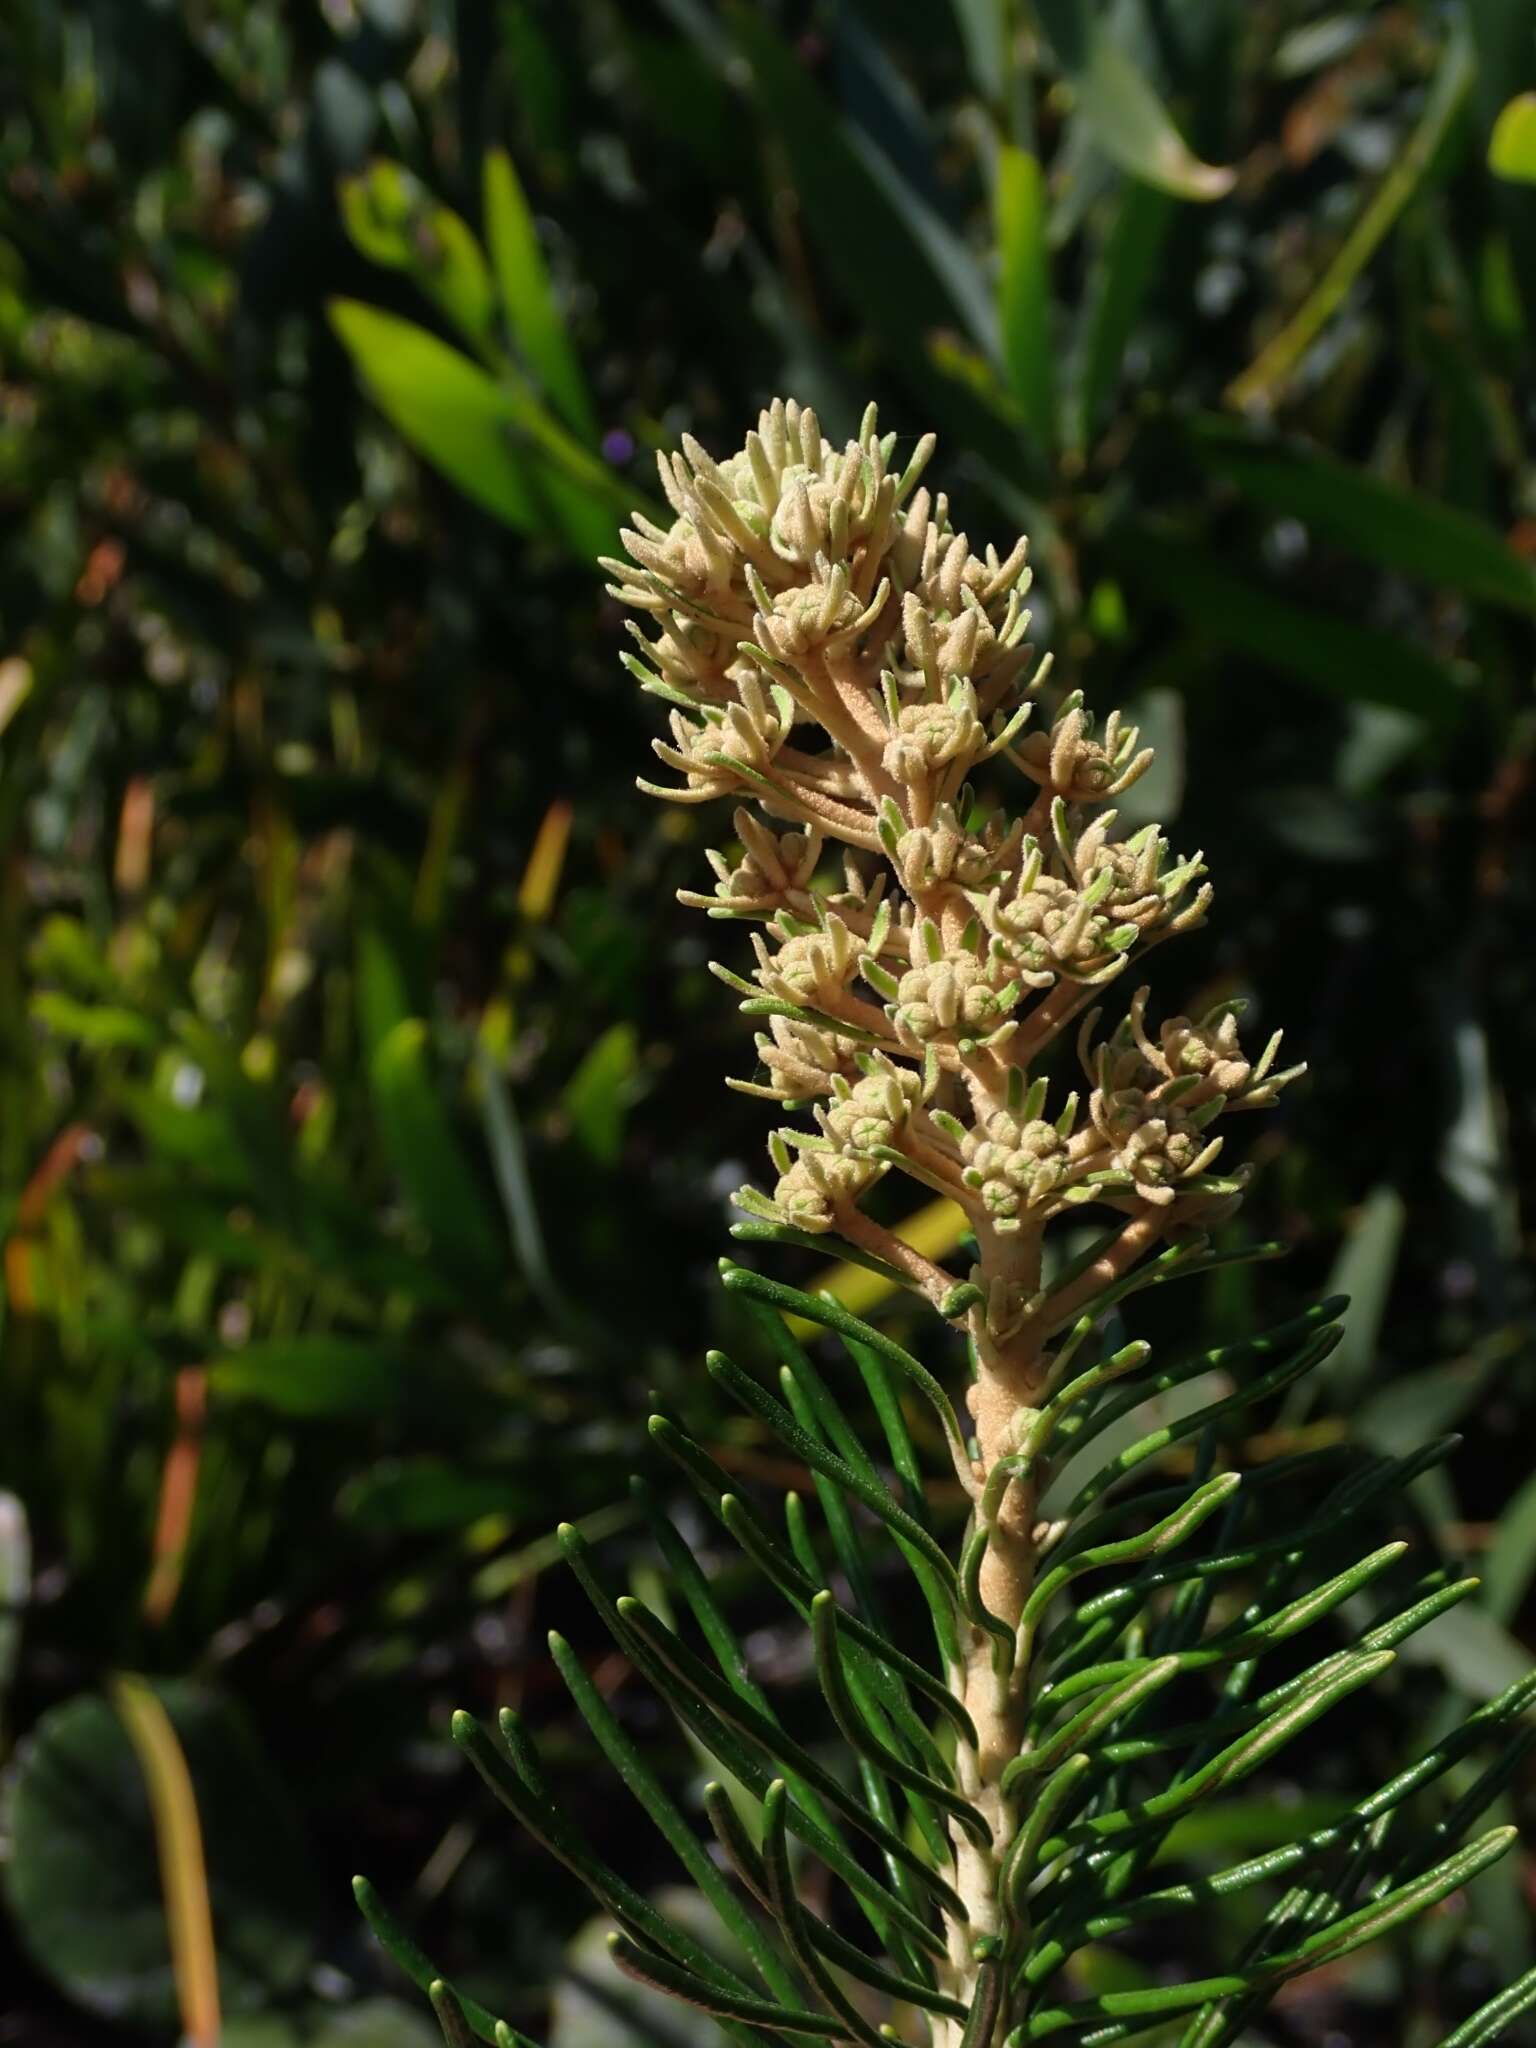 Image of Astrotricha linearis A. Cunn. ex Benth.